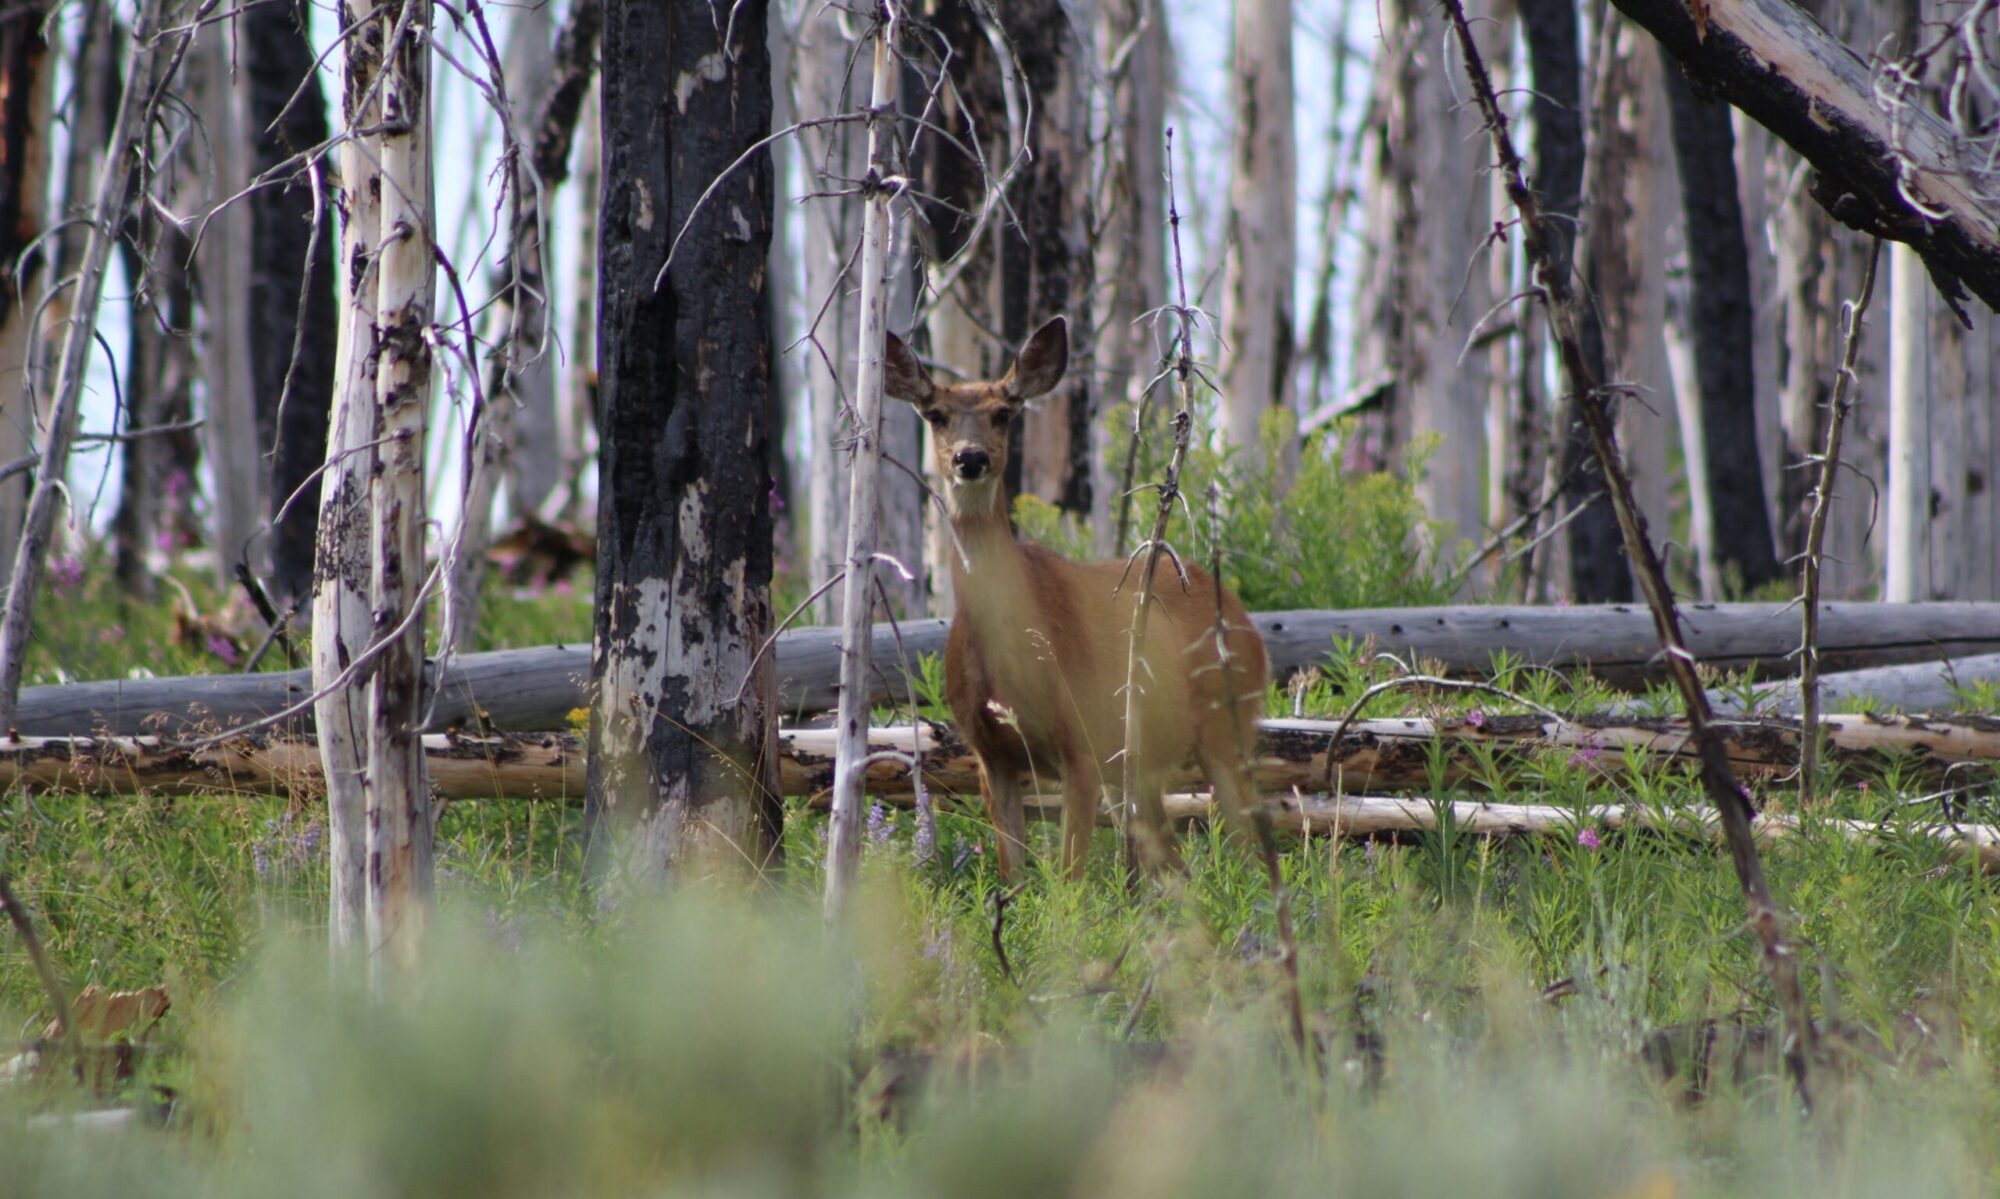 A mule deer doe in a stand of burned trees. Wildflowers bloom along the ground.